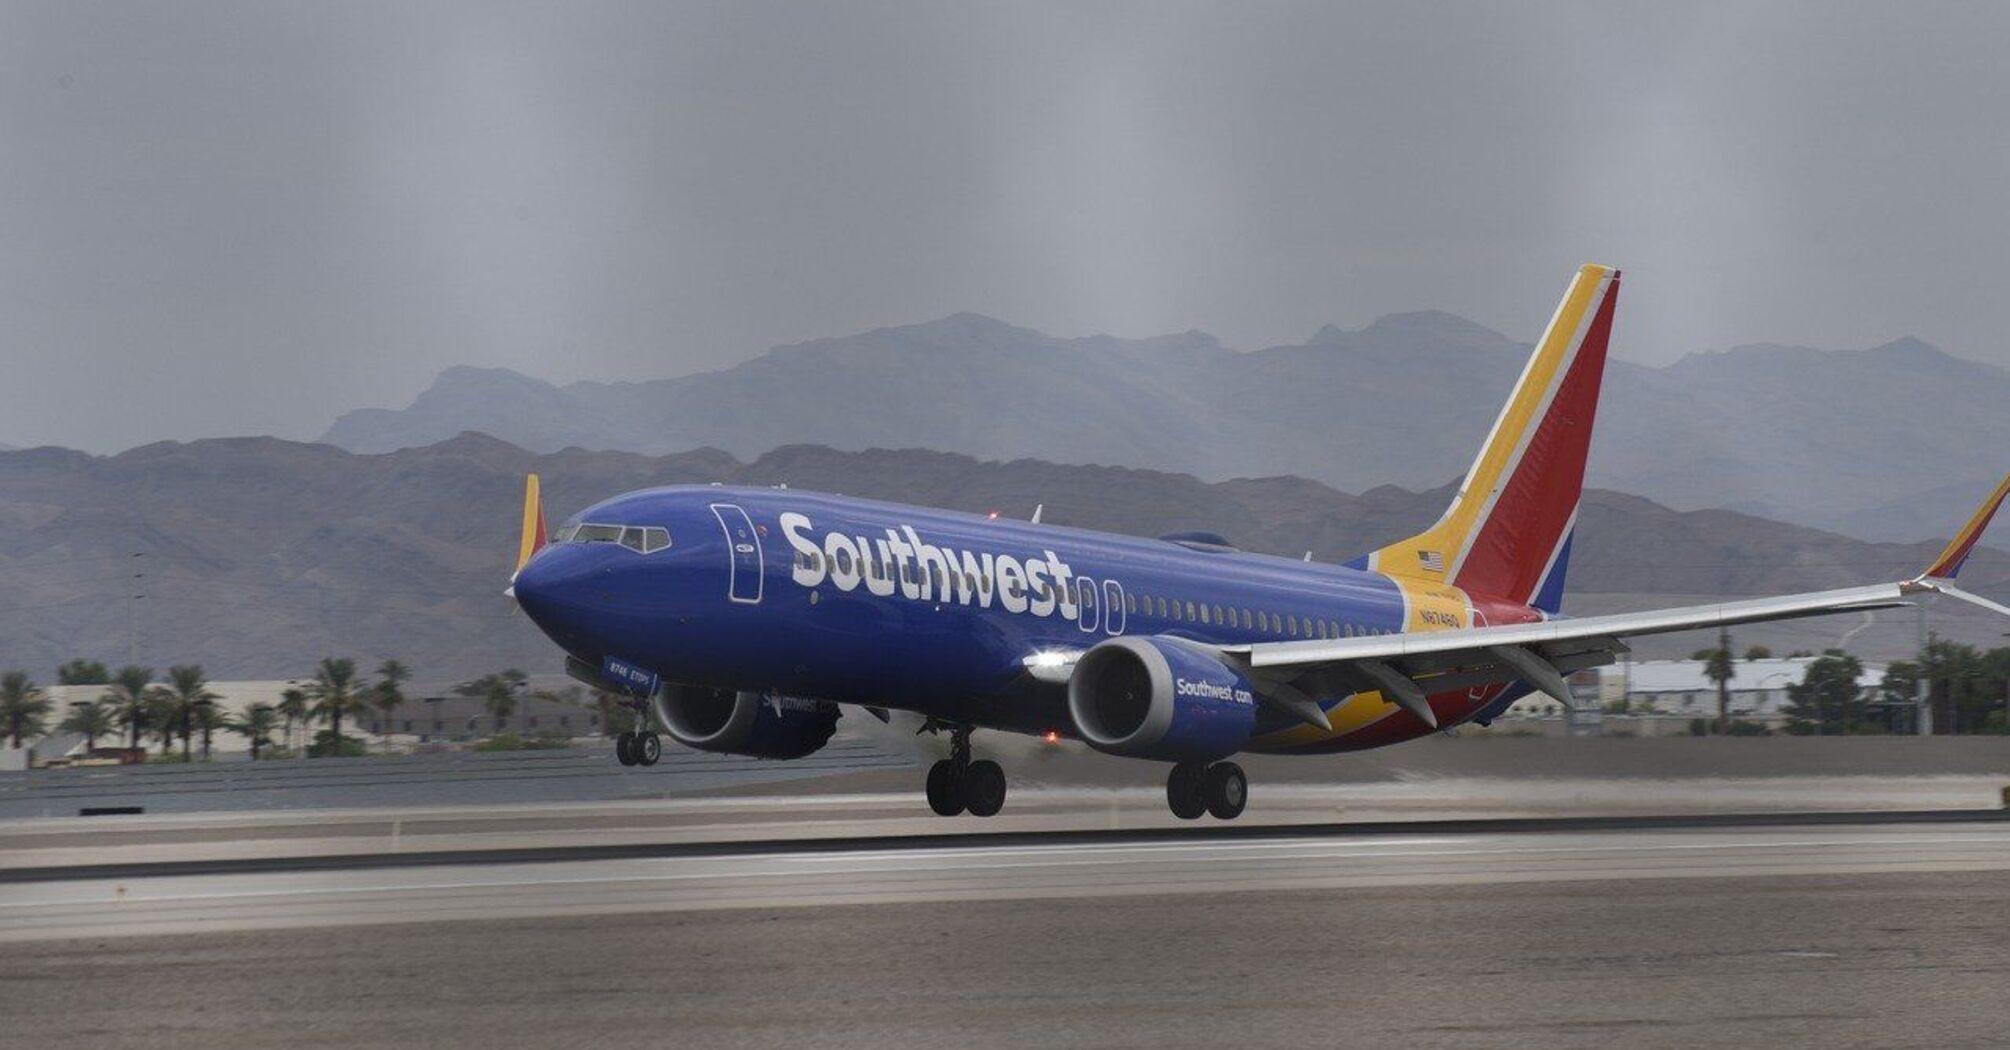 Fight on board a Southwest Airlines flight: what participants of the fistfight may expect